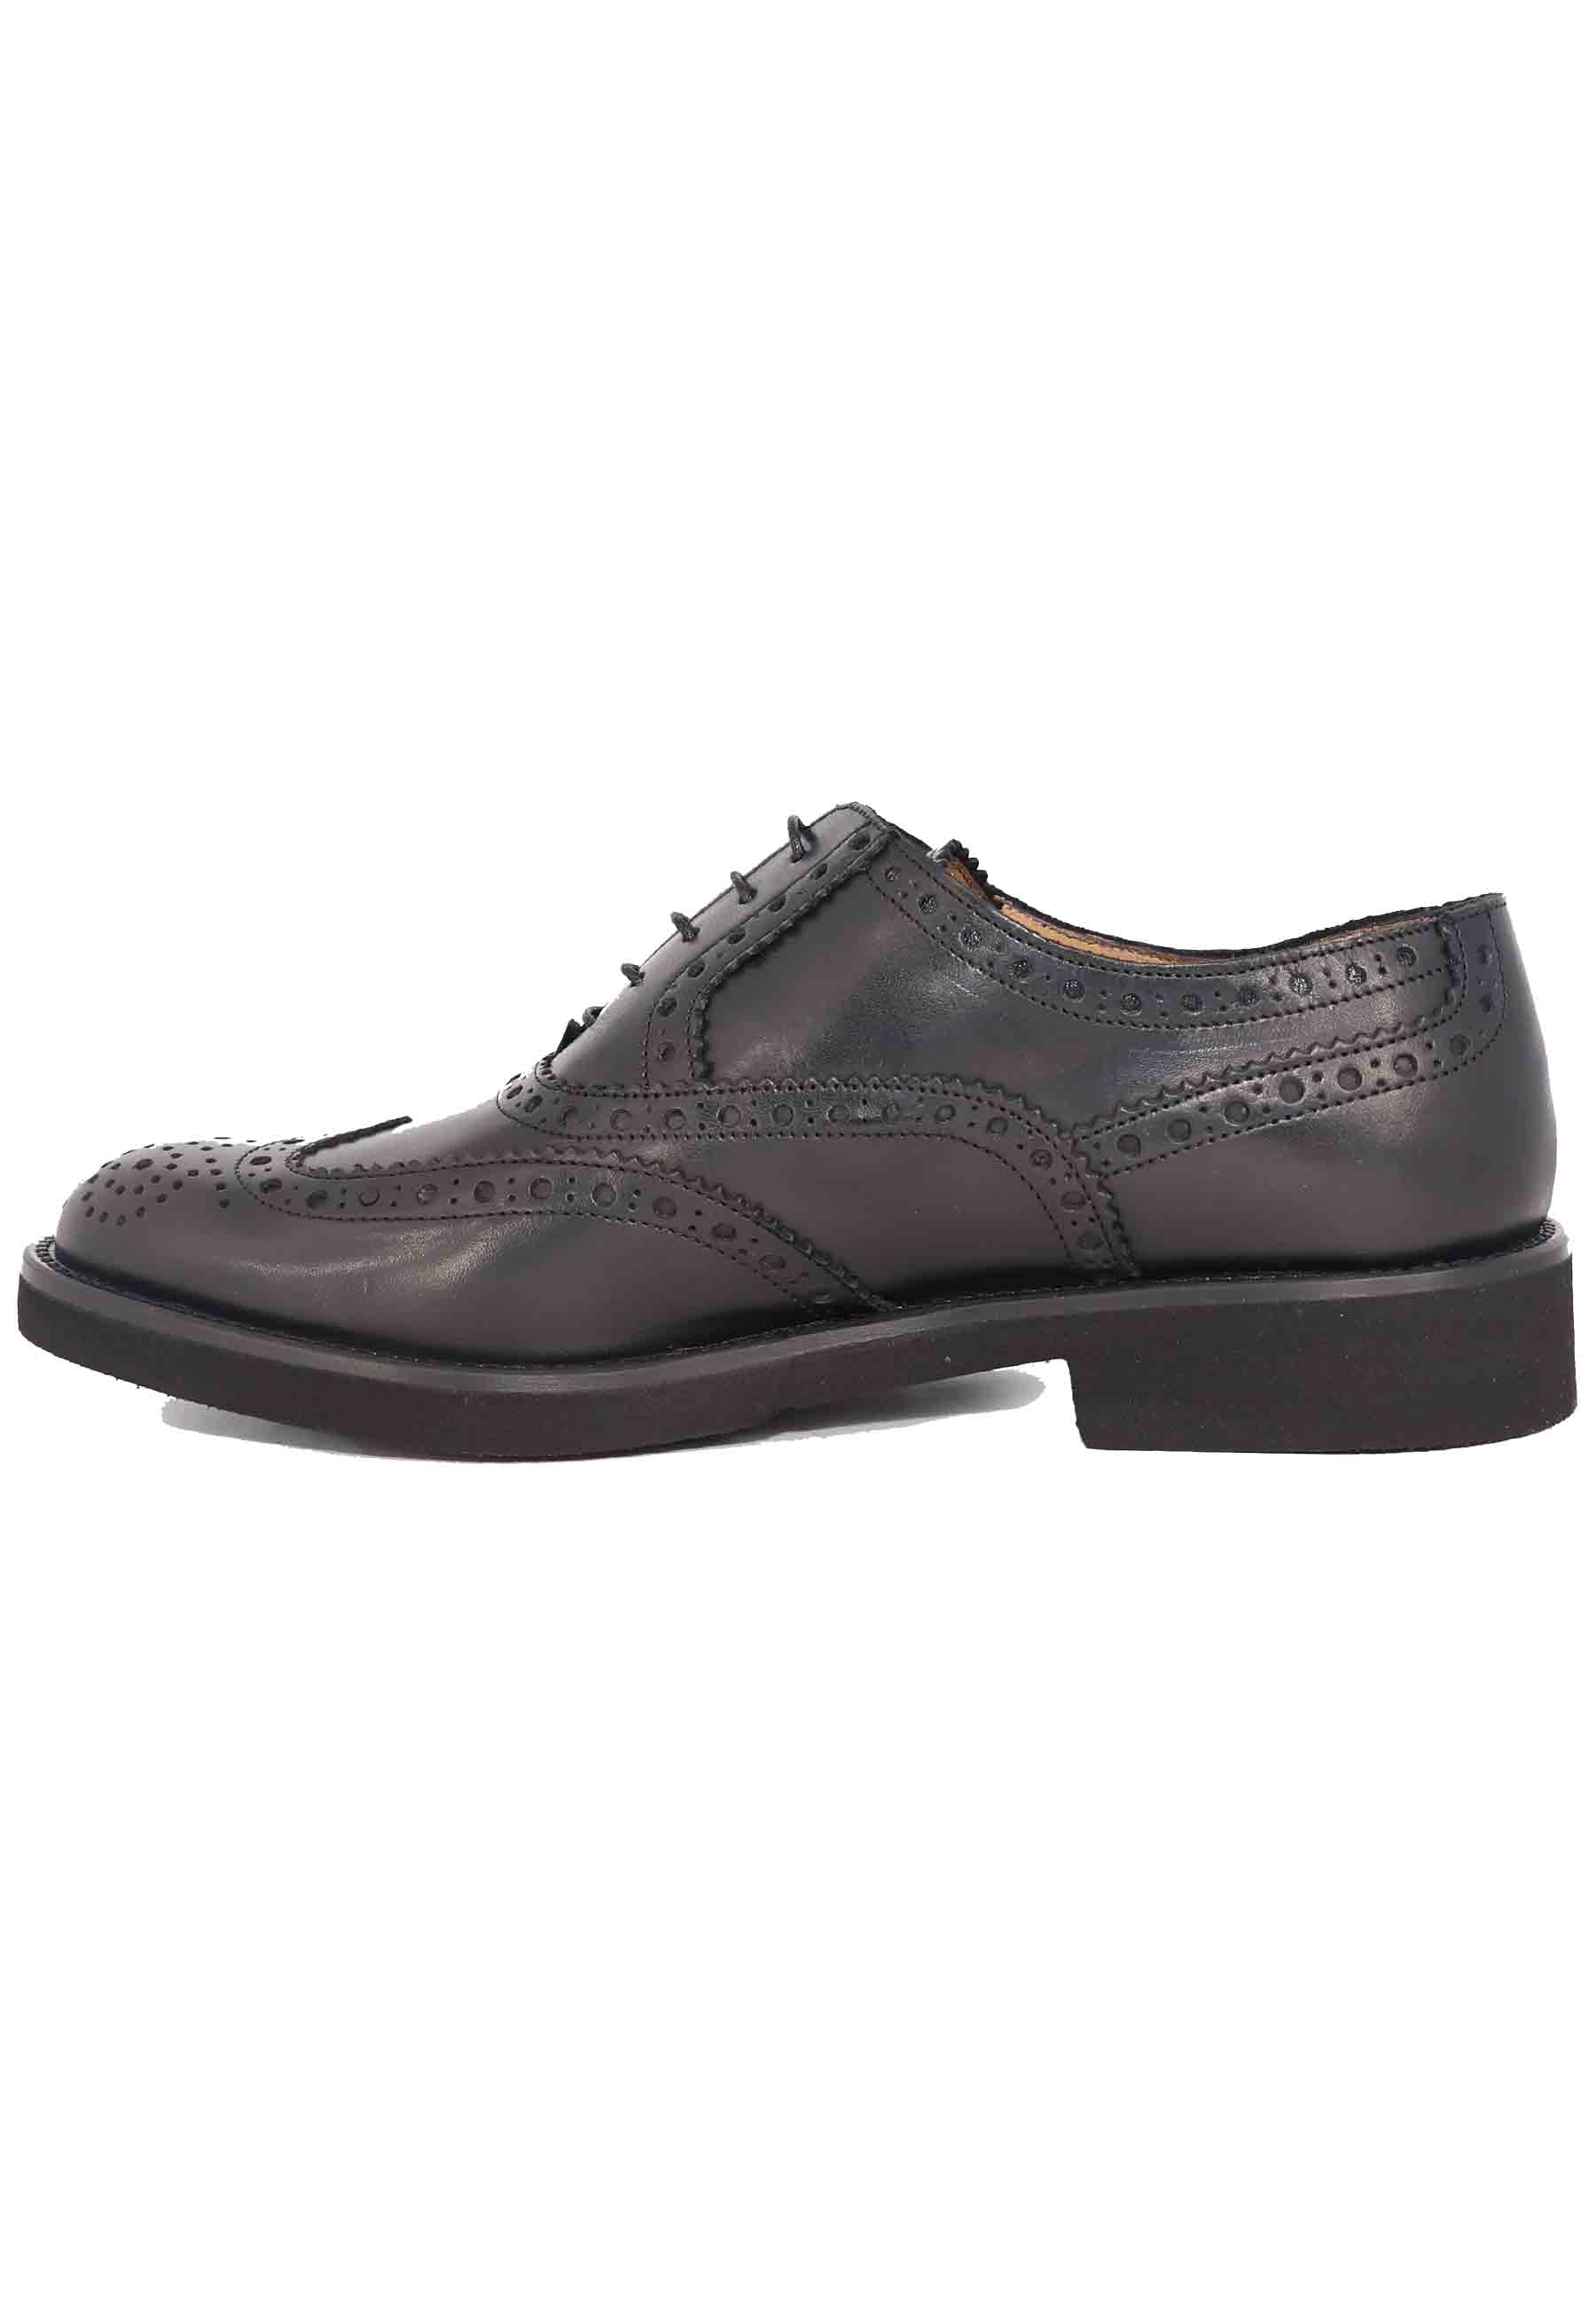 Men's lace-ups in black leather with English stitching and ultra-light rubber sole